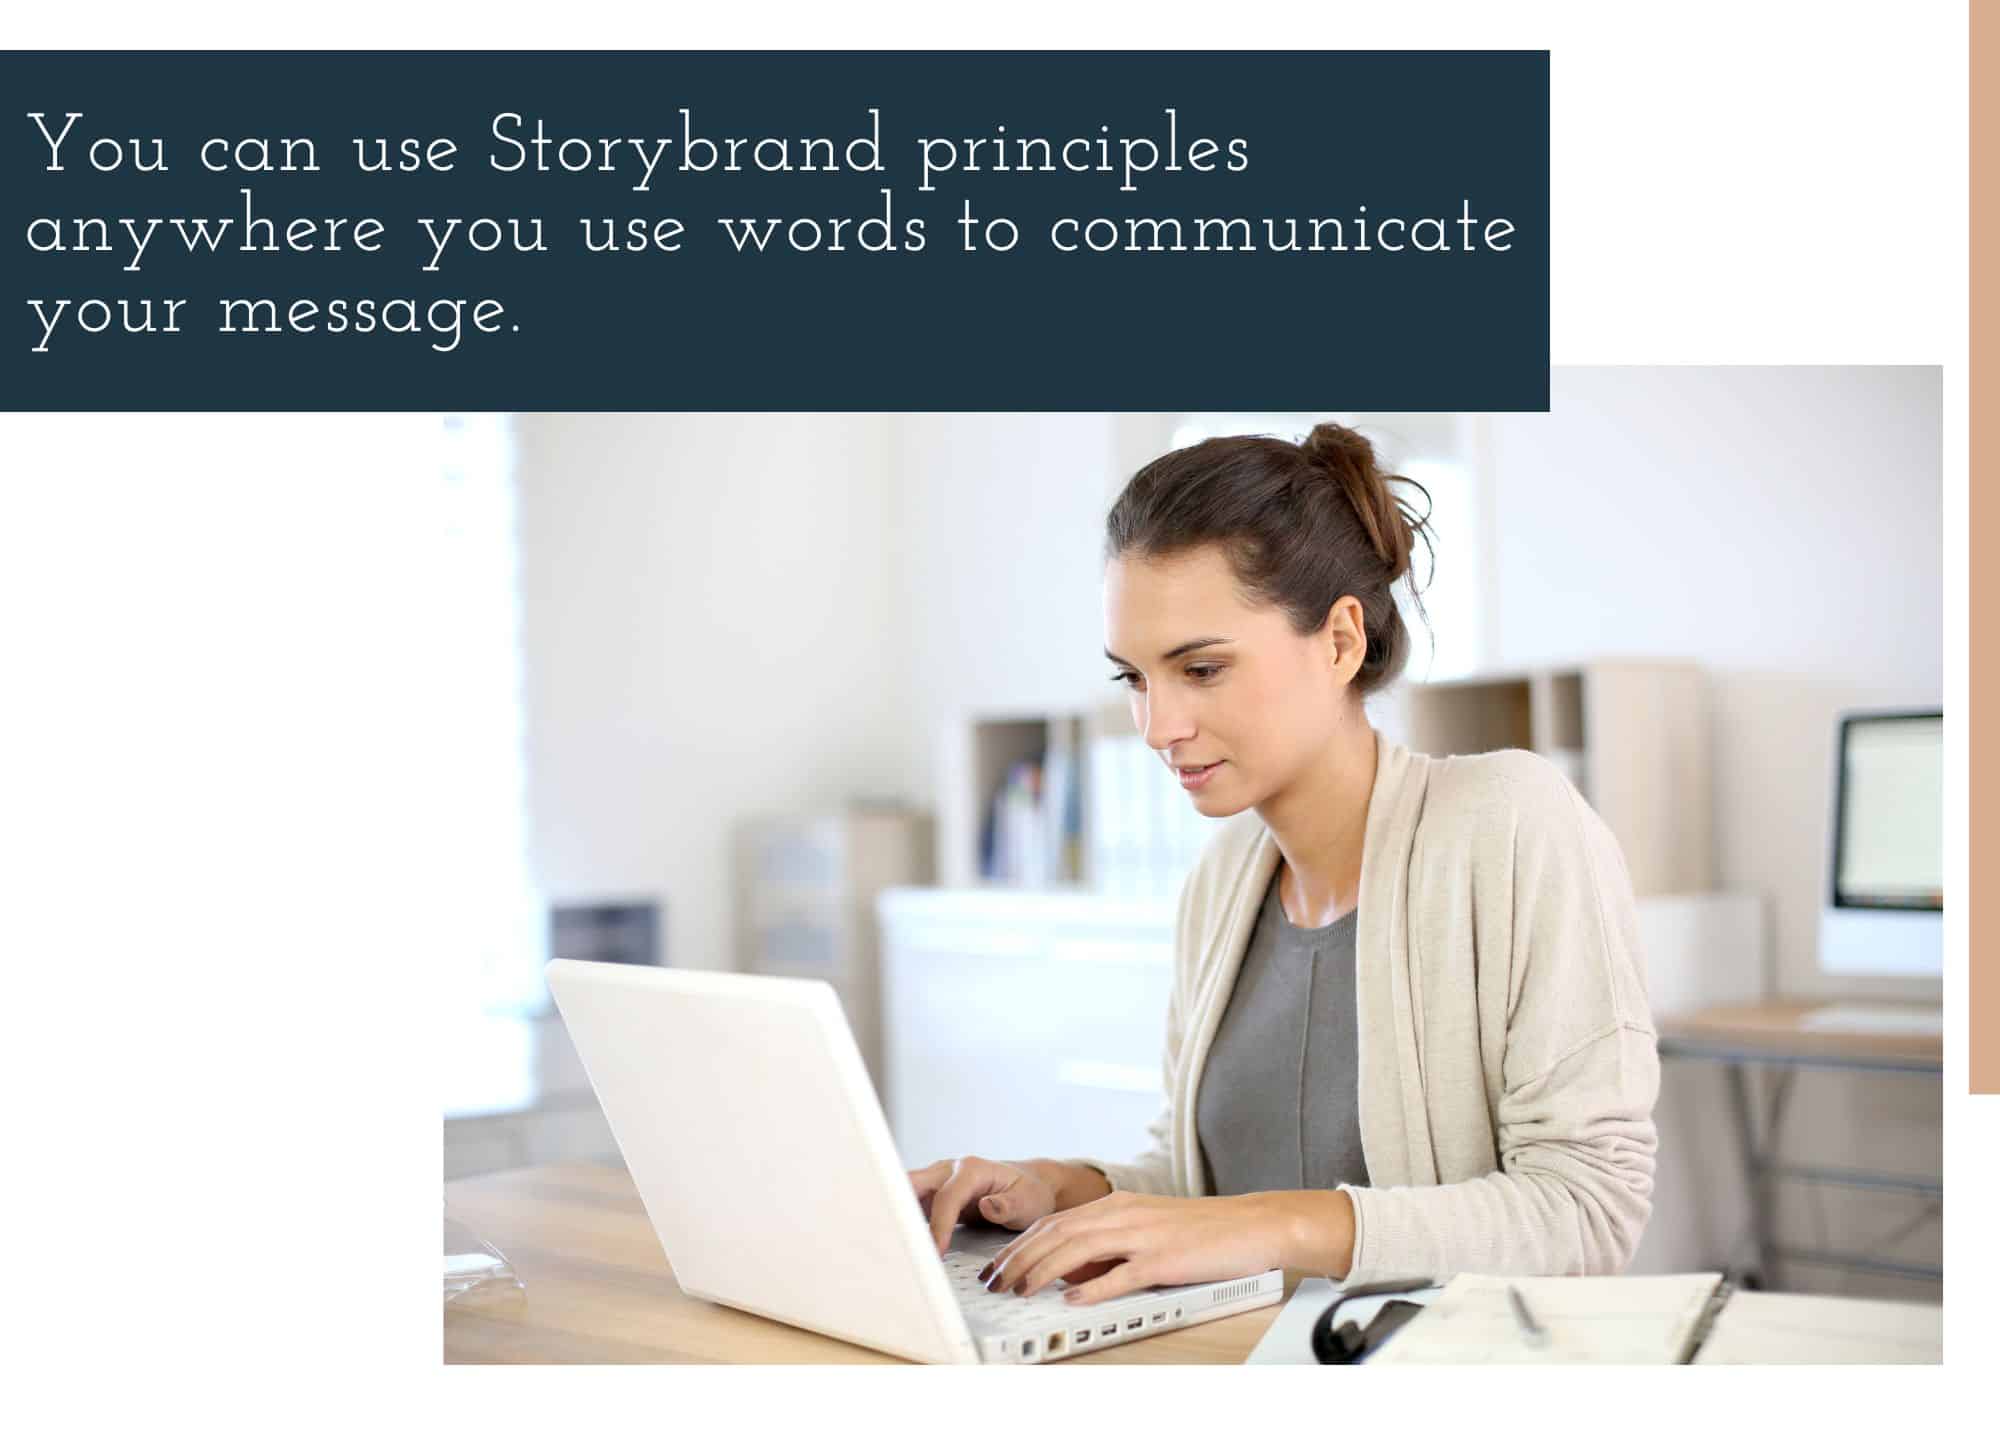 Using Storybrand principles to communicate effectively